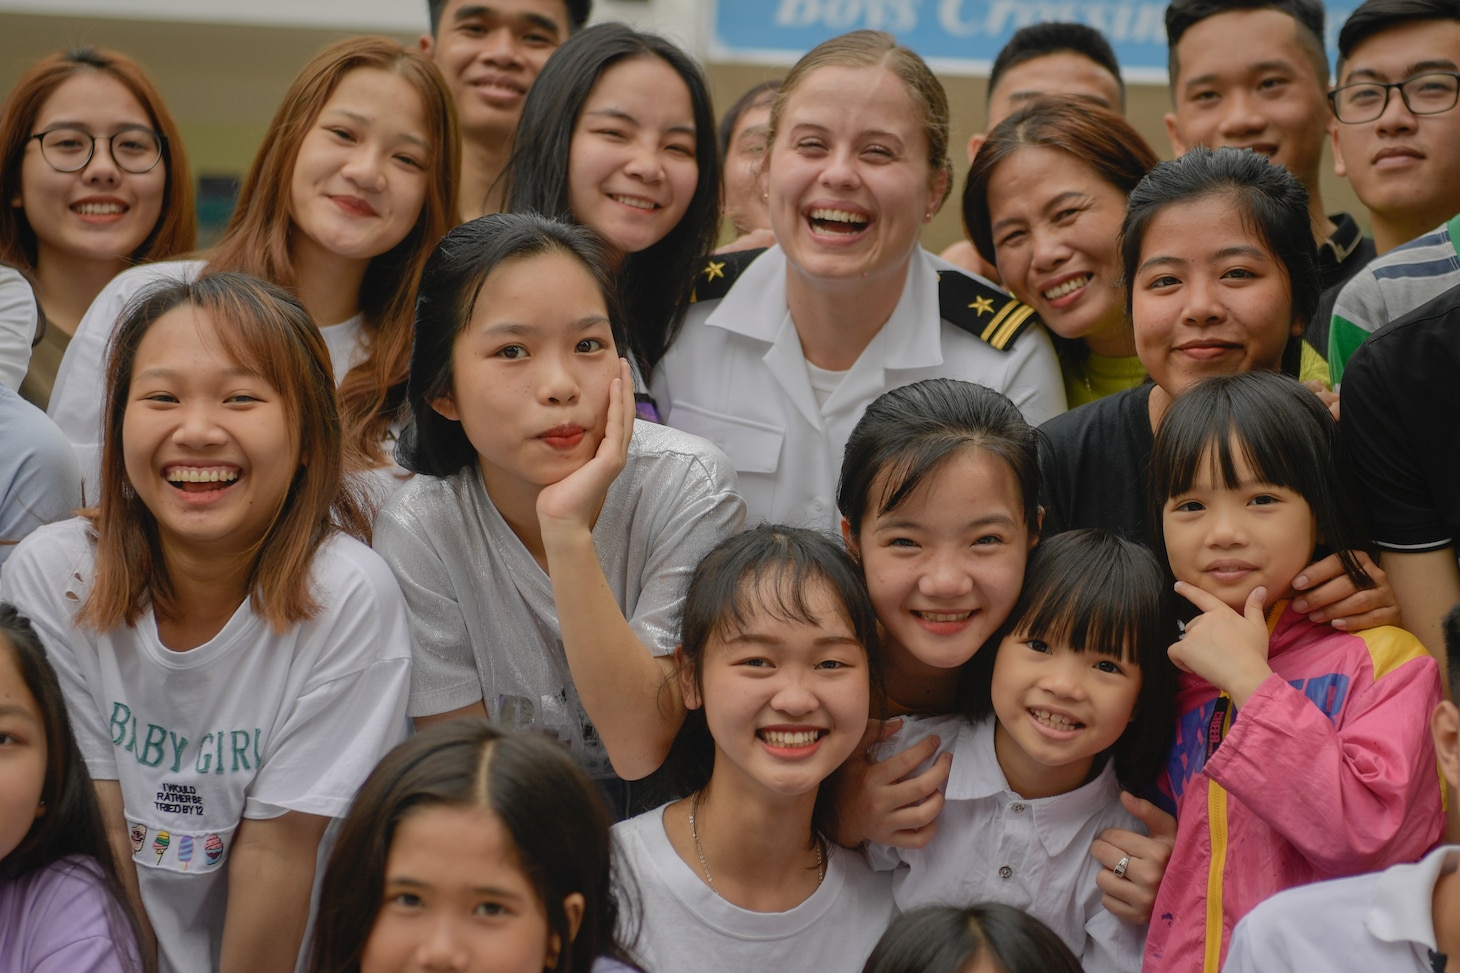 200306-N-YQ383-1088 VIETNAM (March 6, 2020) Lt. j.g. Courtney Avon, a public affairs officer, poses for a photo with children at the Dorothea’s Project Legacies Charity Center, Da Nang, Vietnam, during a community relations project organized by the aircraft carrier USS Theodore Roosevelt (CVN 71) March 6, 2020. Theodore Roosevelt and the Ticonderoga-class guided-missile cruiser USS Bunker Hill (CG 52) are in Vietnam for a port visit during their scheduled deployment to the Indo-Pacific.